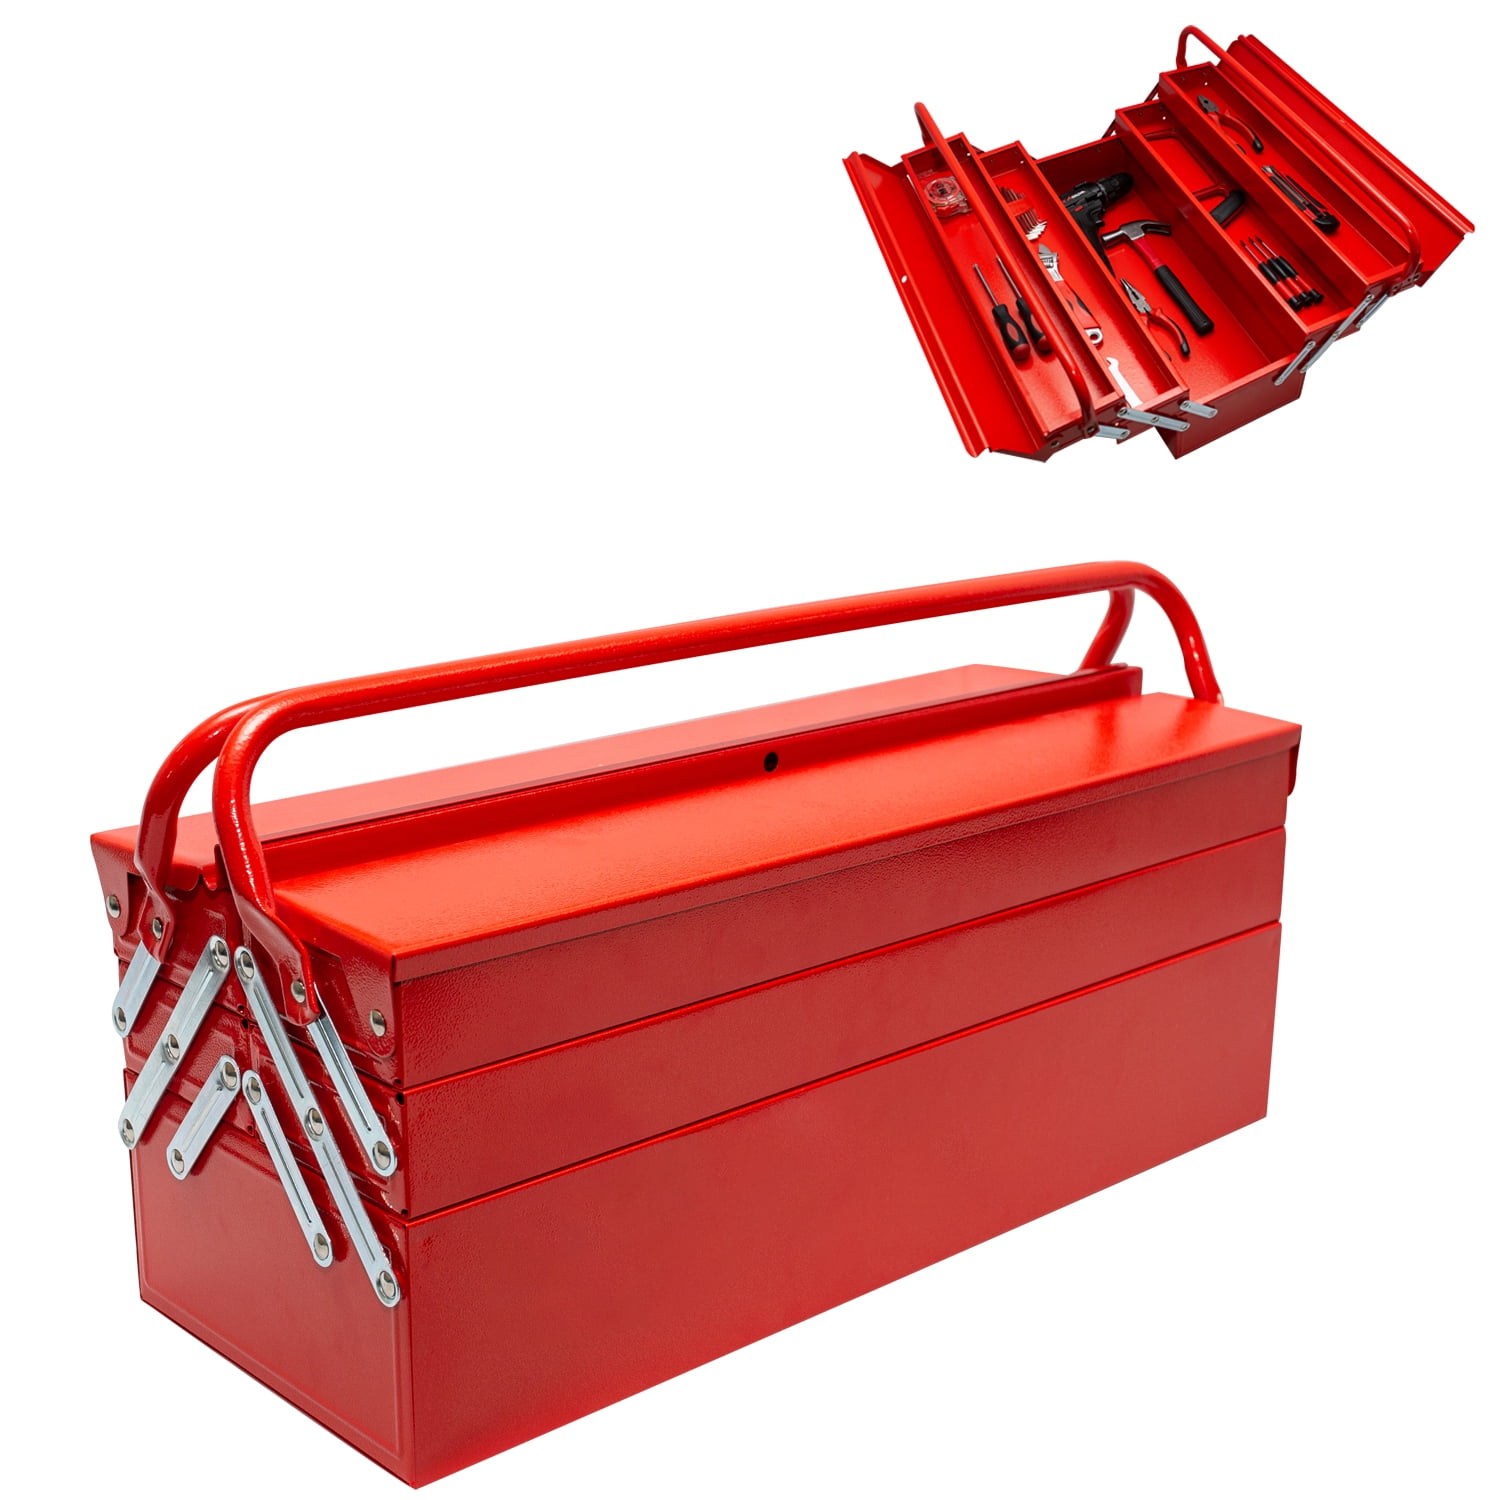 Large 21" 53.5cm Metal Cantilever Toolbox Tool Box Storage 5 Tray Chest #1808 